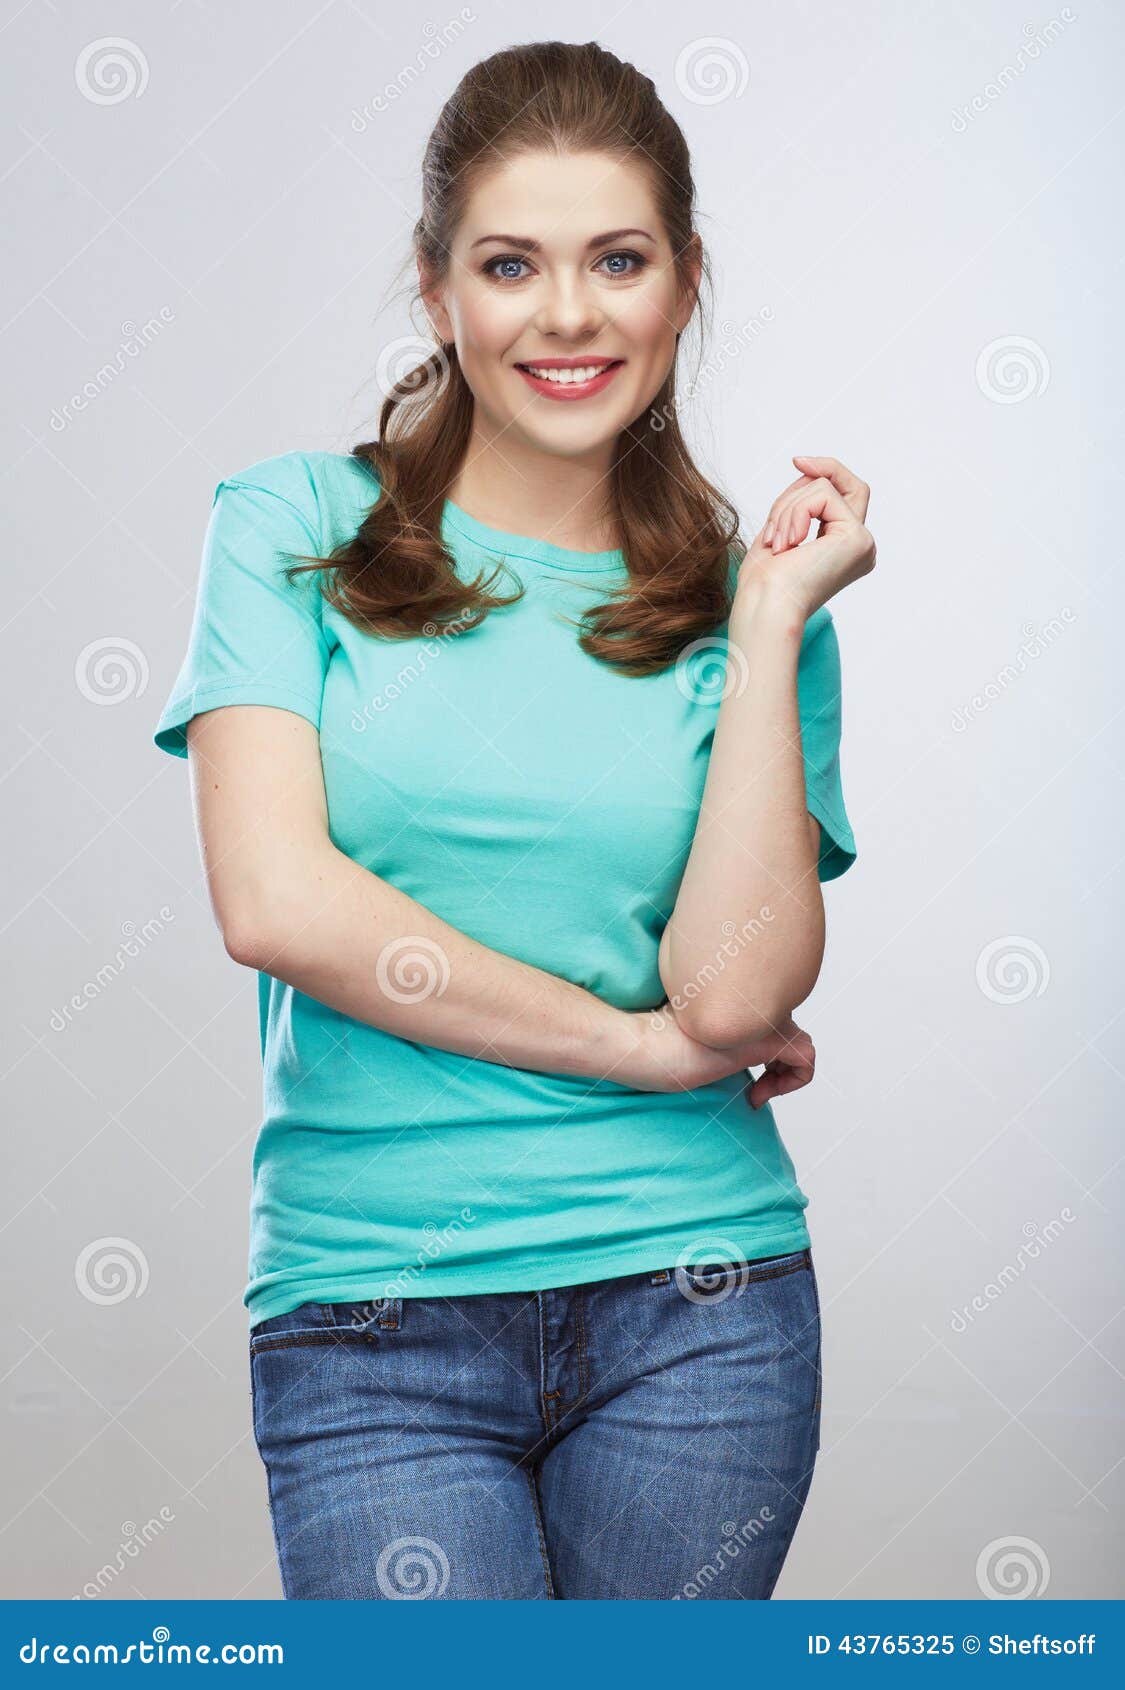 Casual Style Young Woman Portrait. Toothy Smile Stock Image - Image of ...